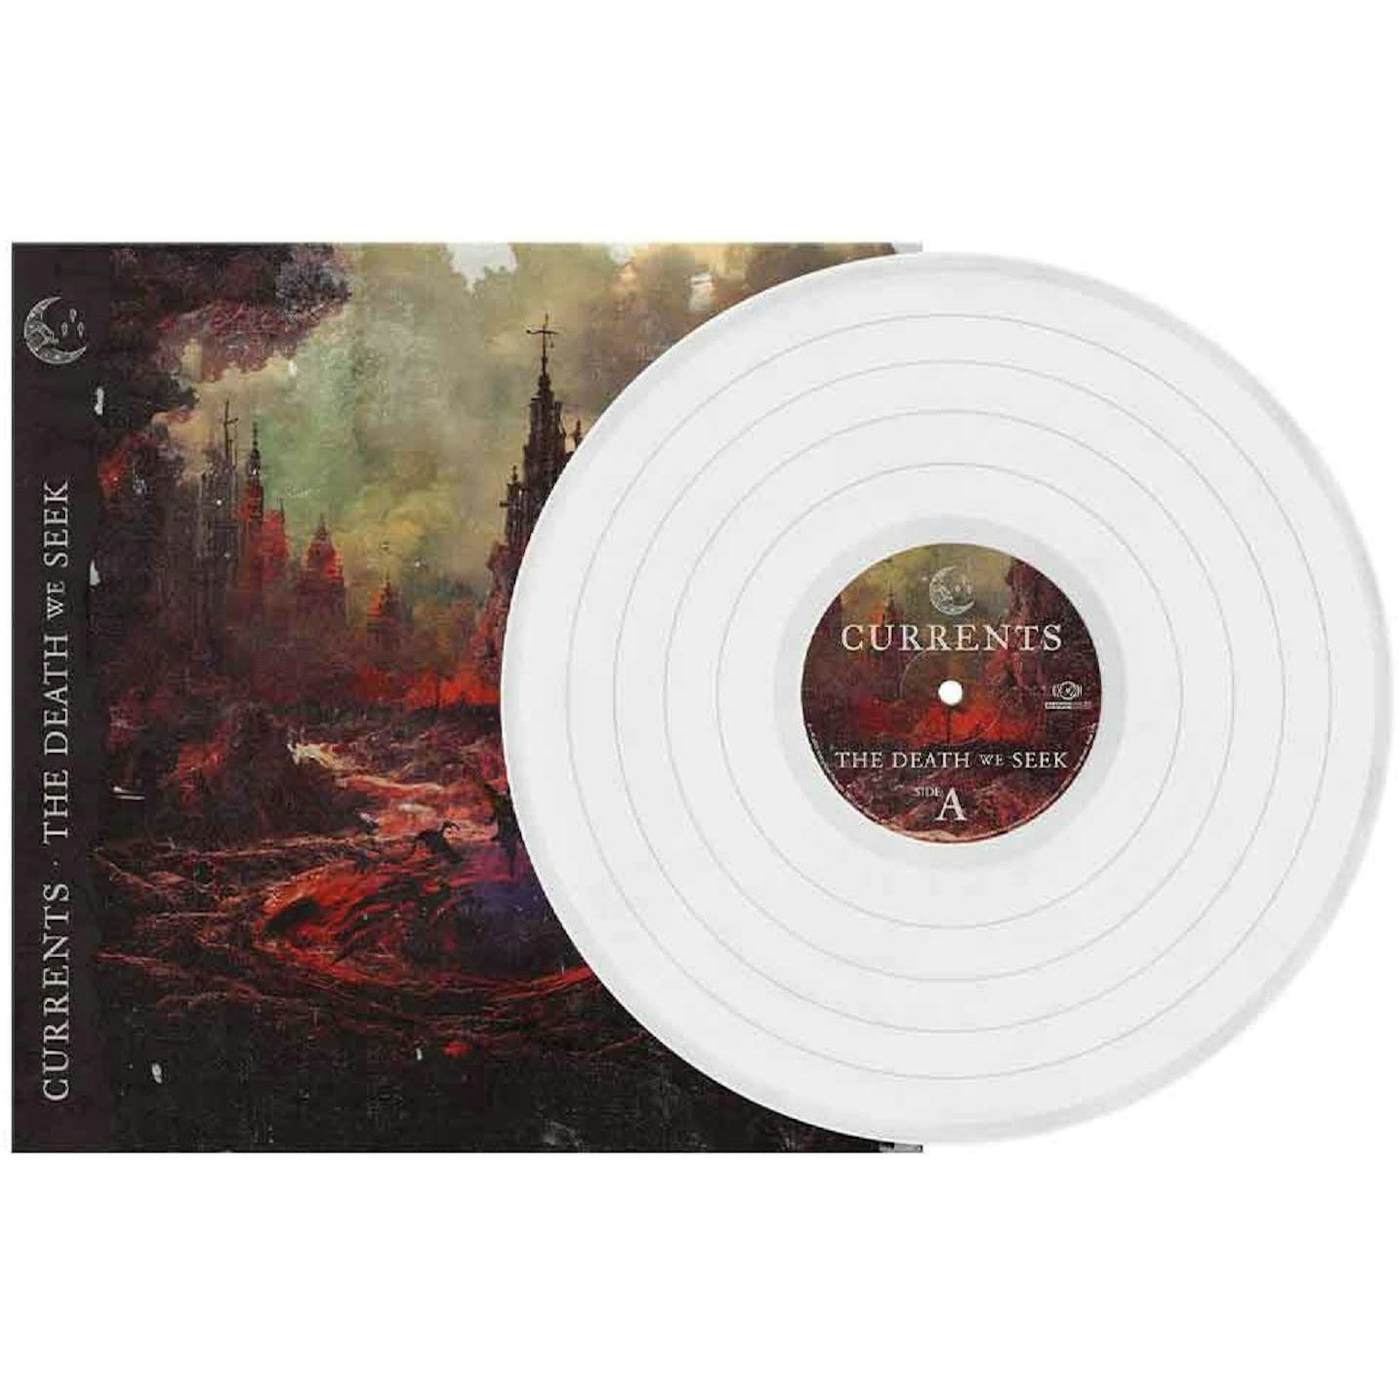 Currents The Death We Seek - White Vinyl Record